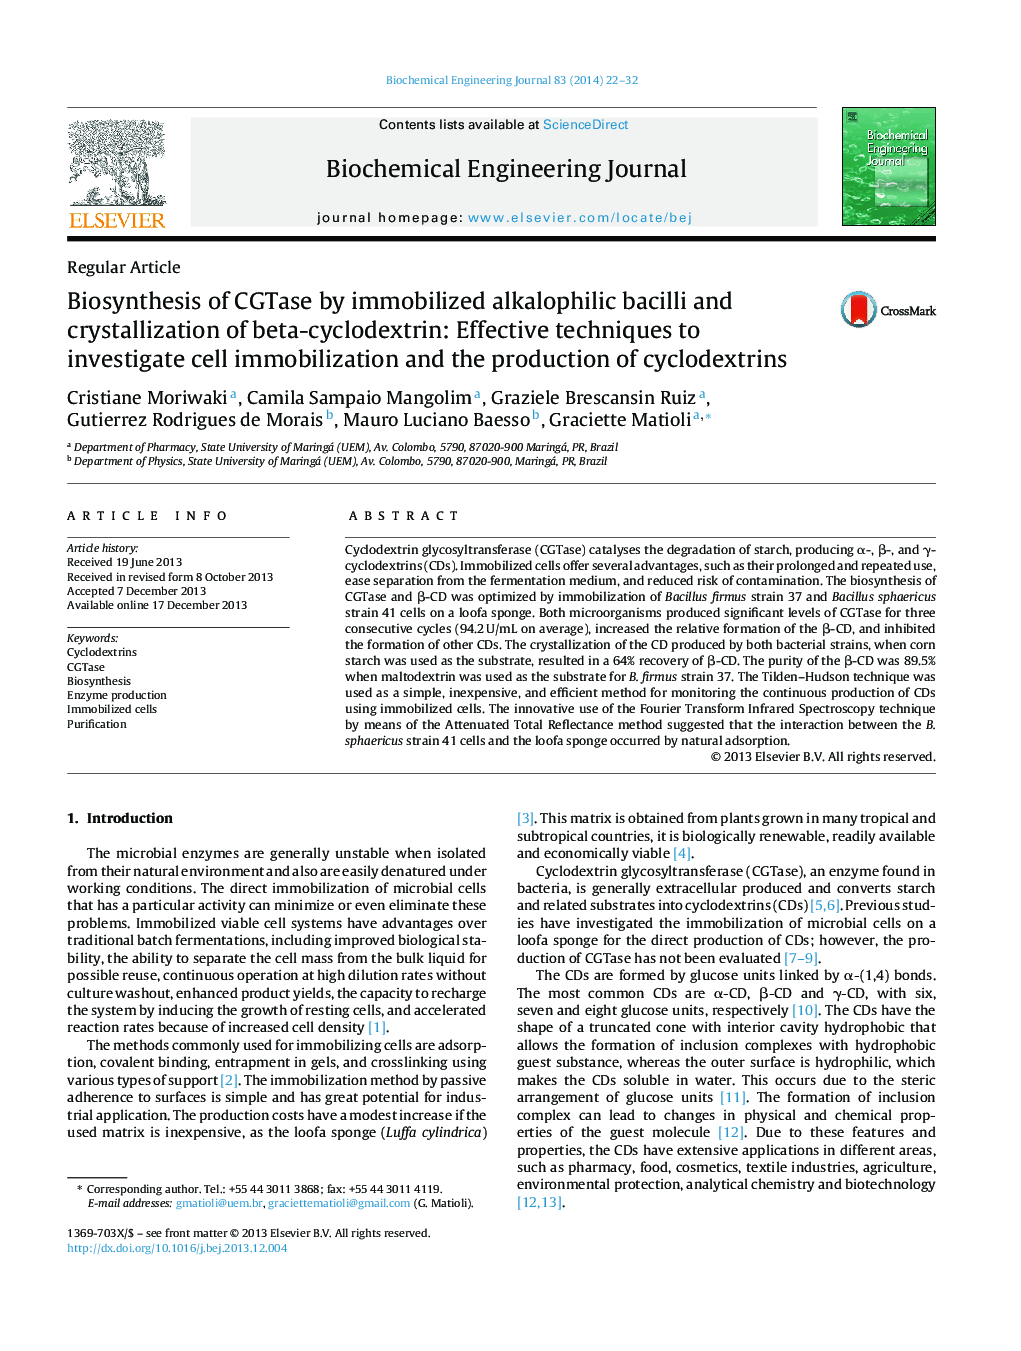 Biosynthesis of CGTase by immobilized alkalophilic bacilli and crystallization of beta-cyclodextrin: Effective techniques to investigate cell immobilization and the production of cyclodextrins